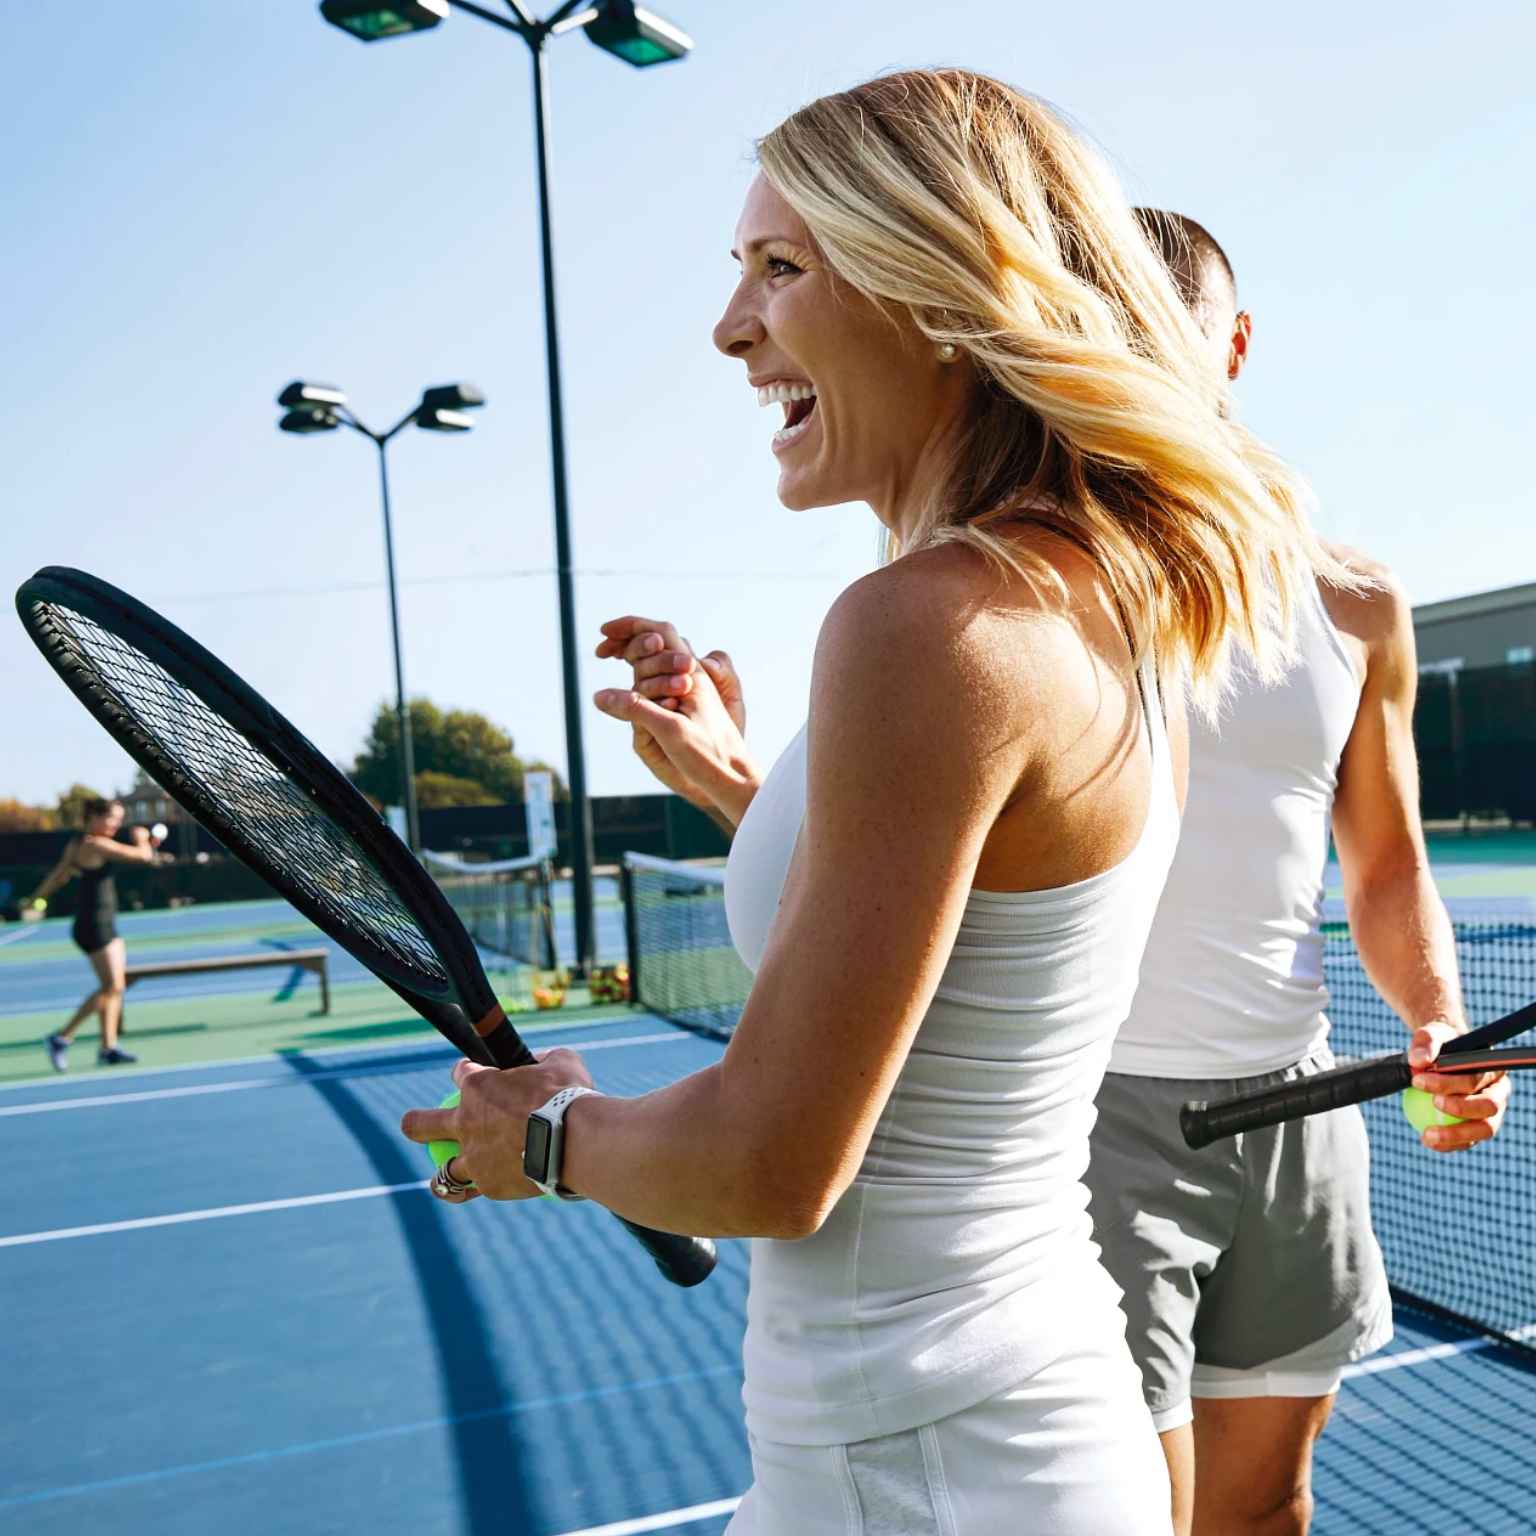 Two women smiling playing tennis on an outdoor court